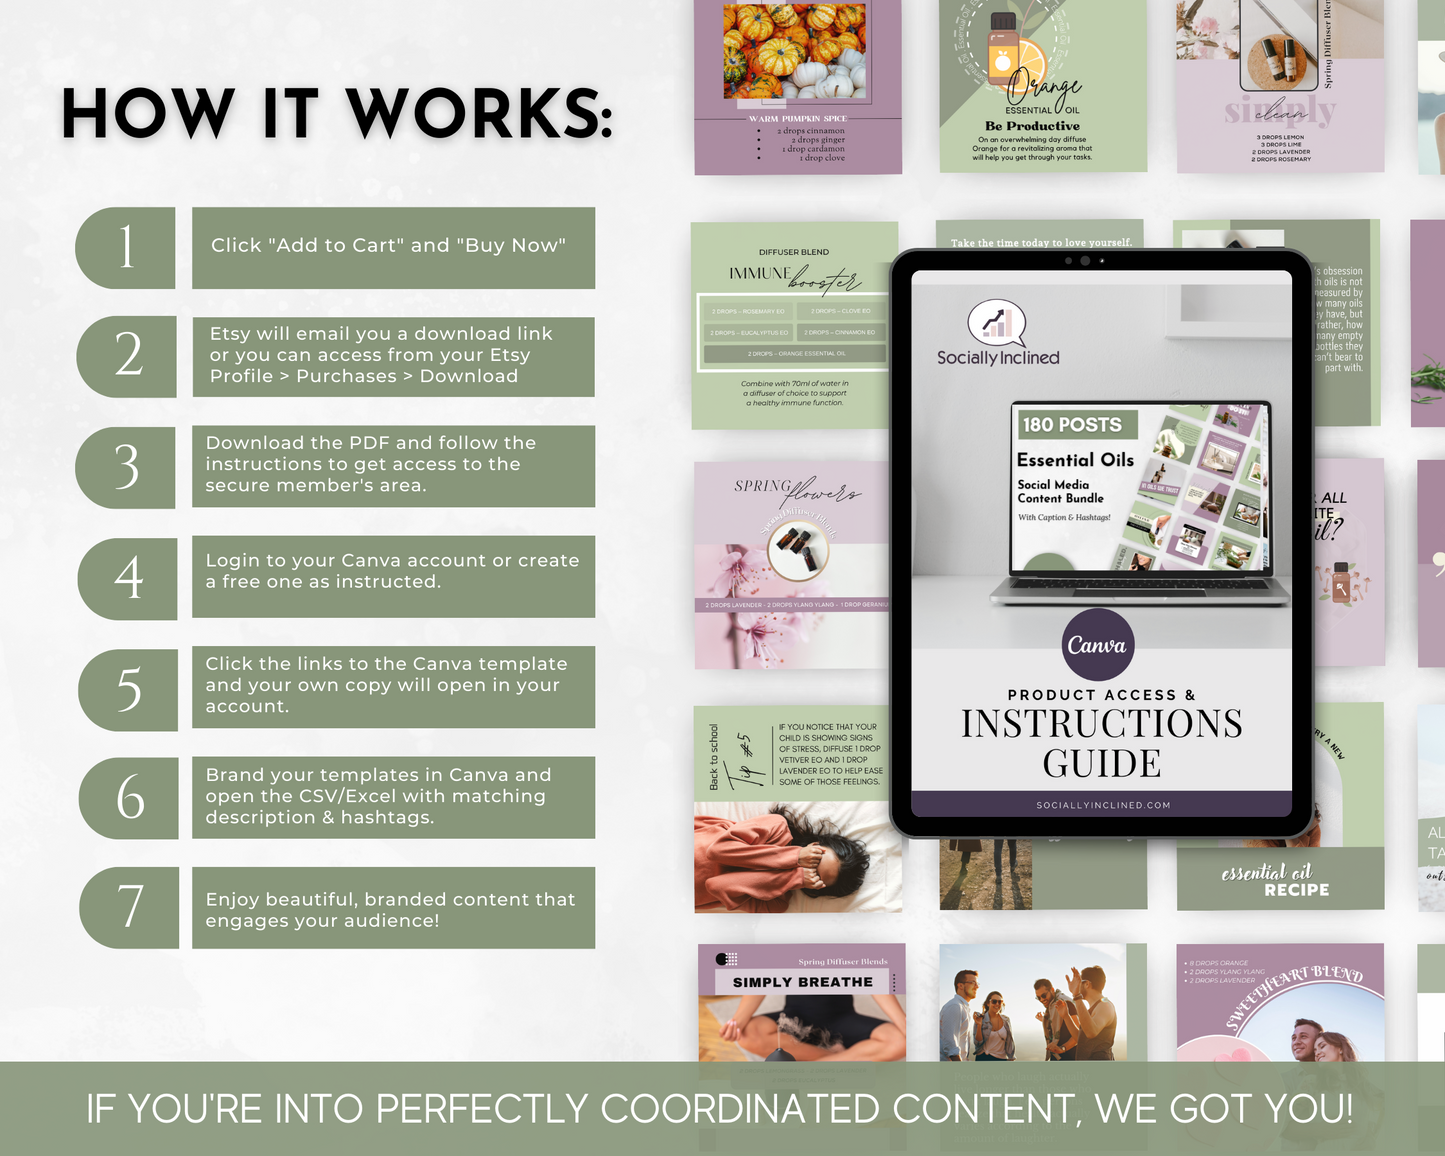 Instruction guide for maximizing the wellness potential of Essential Oils Social Media Post Bundle with Canva Templates from Socially Inclined in your content.